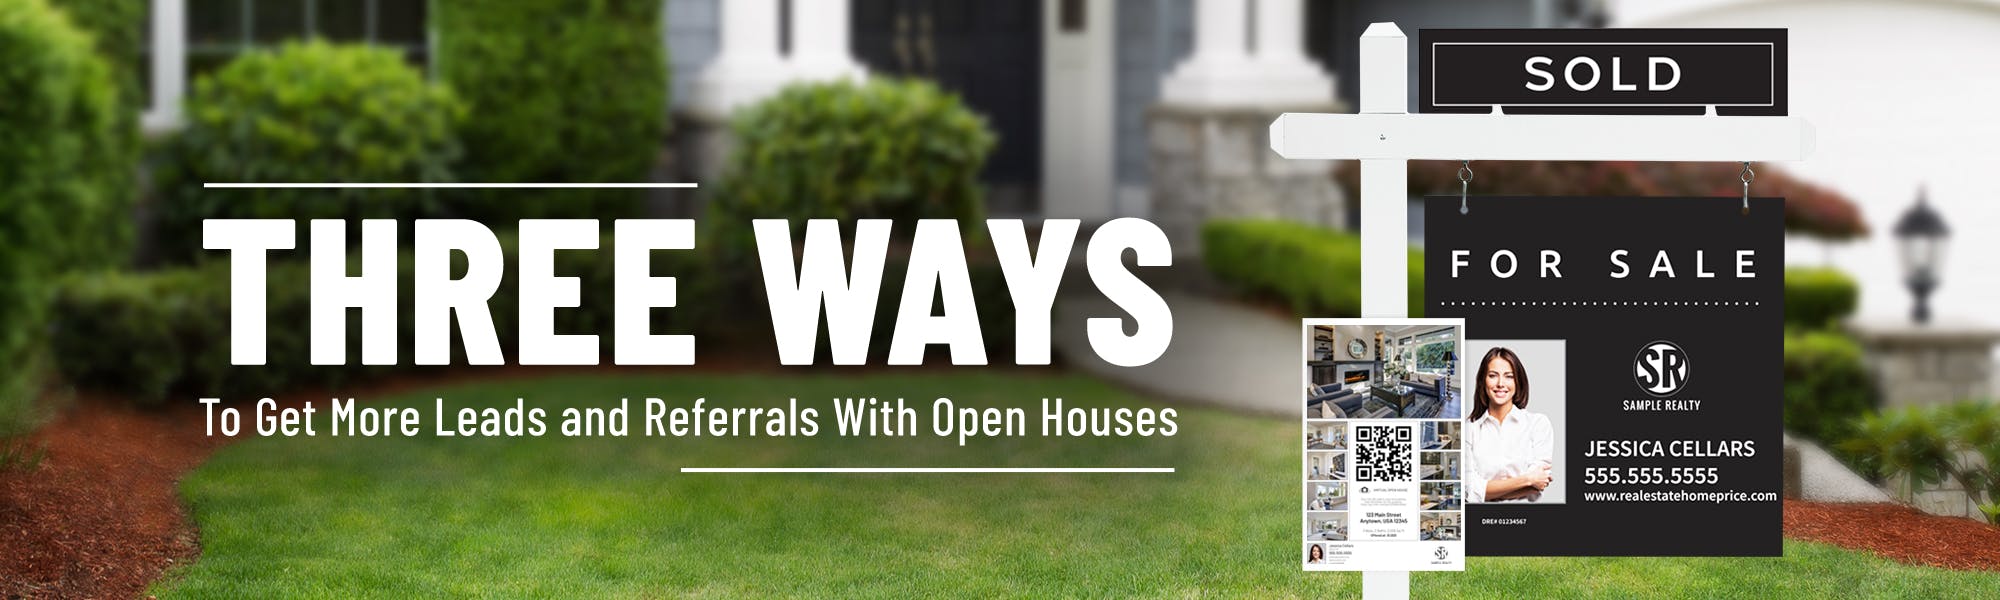 3 Ways To Get More Leads and Referrals With Open Houses